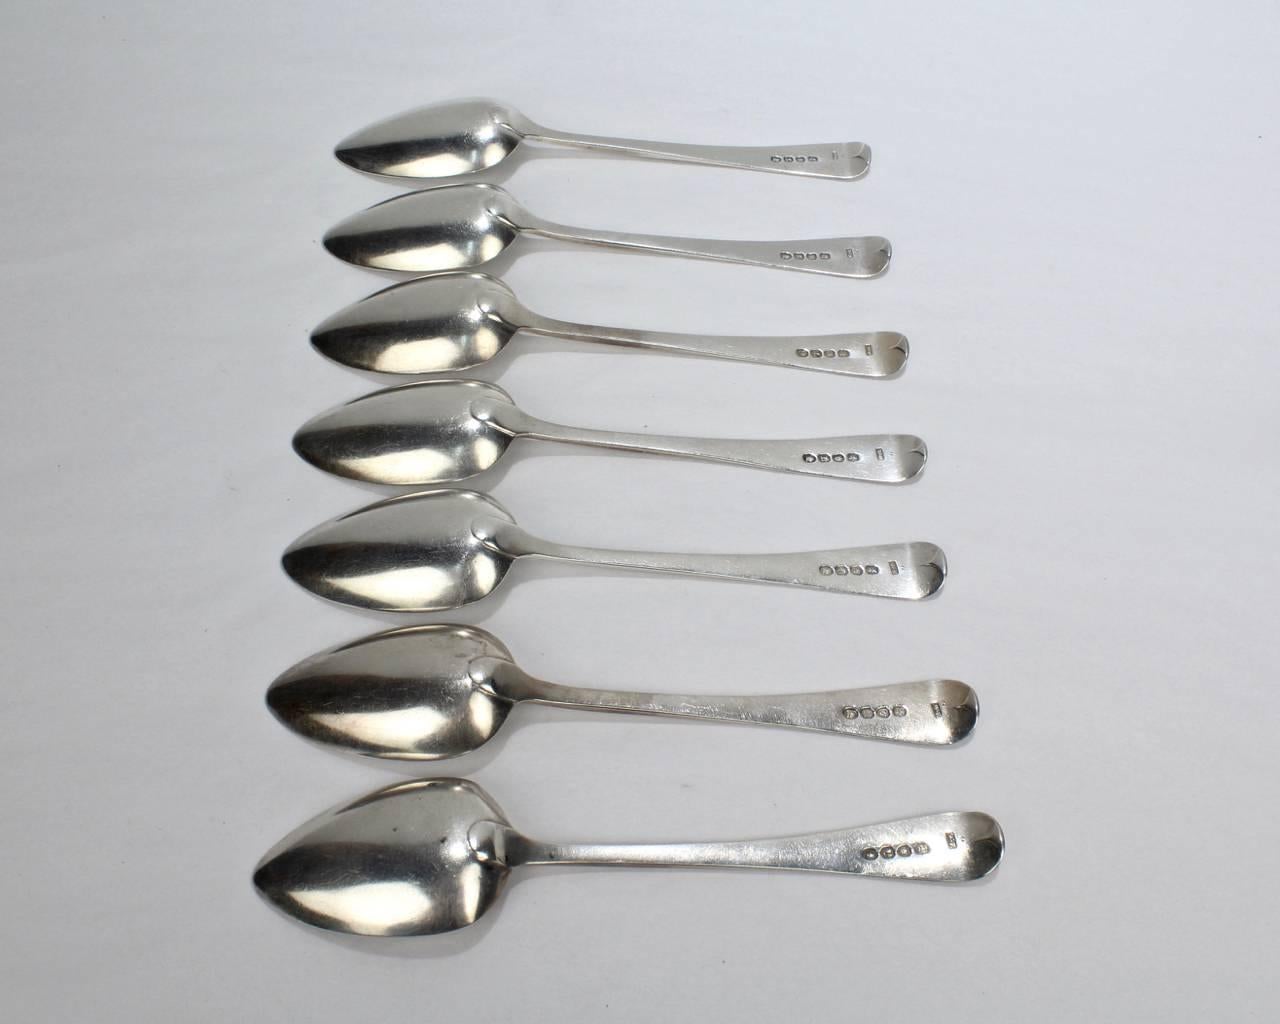 A fine set of eight crested George III English sterling silver spoons.

Each marked WE for William Ely I and 1806. 
  
The terminals have engraved family crests in the form of a falcon (or possibly seagulls). (A very interesting device